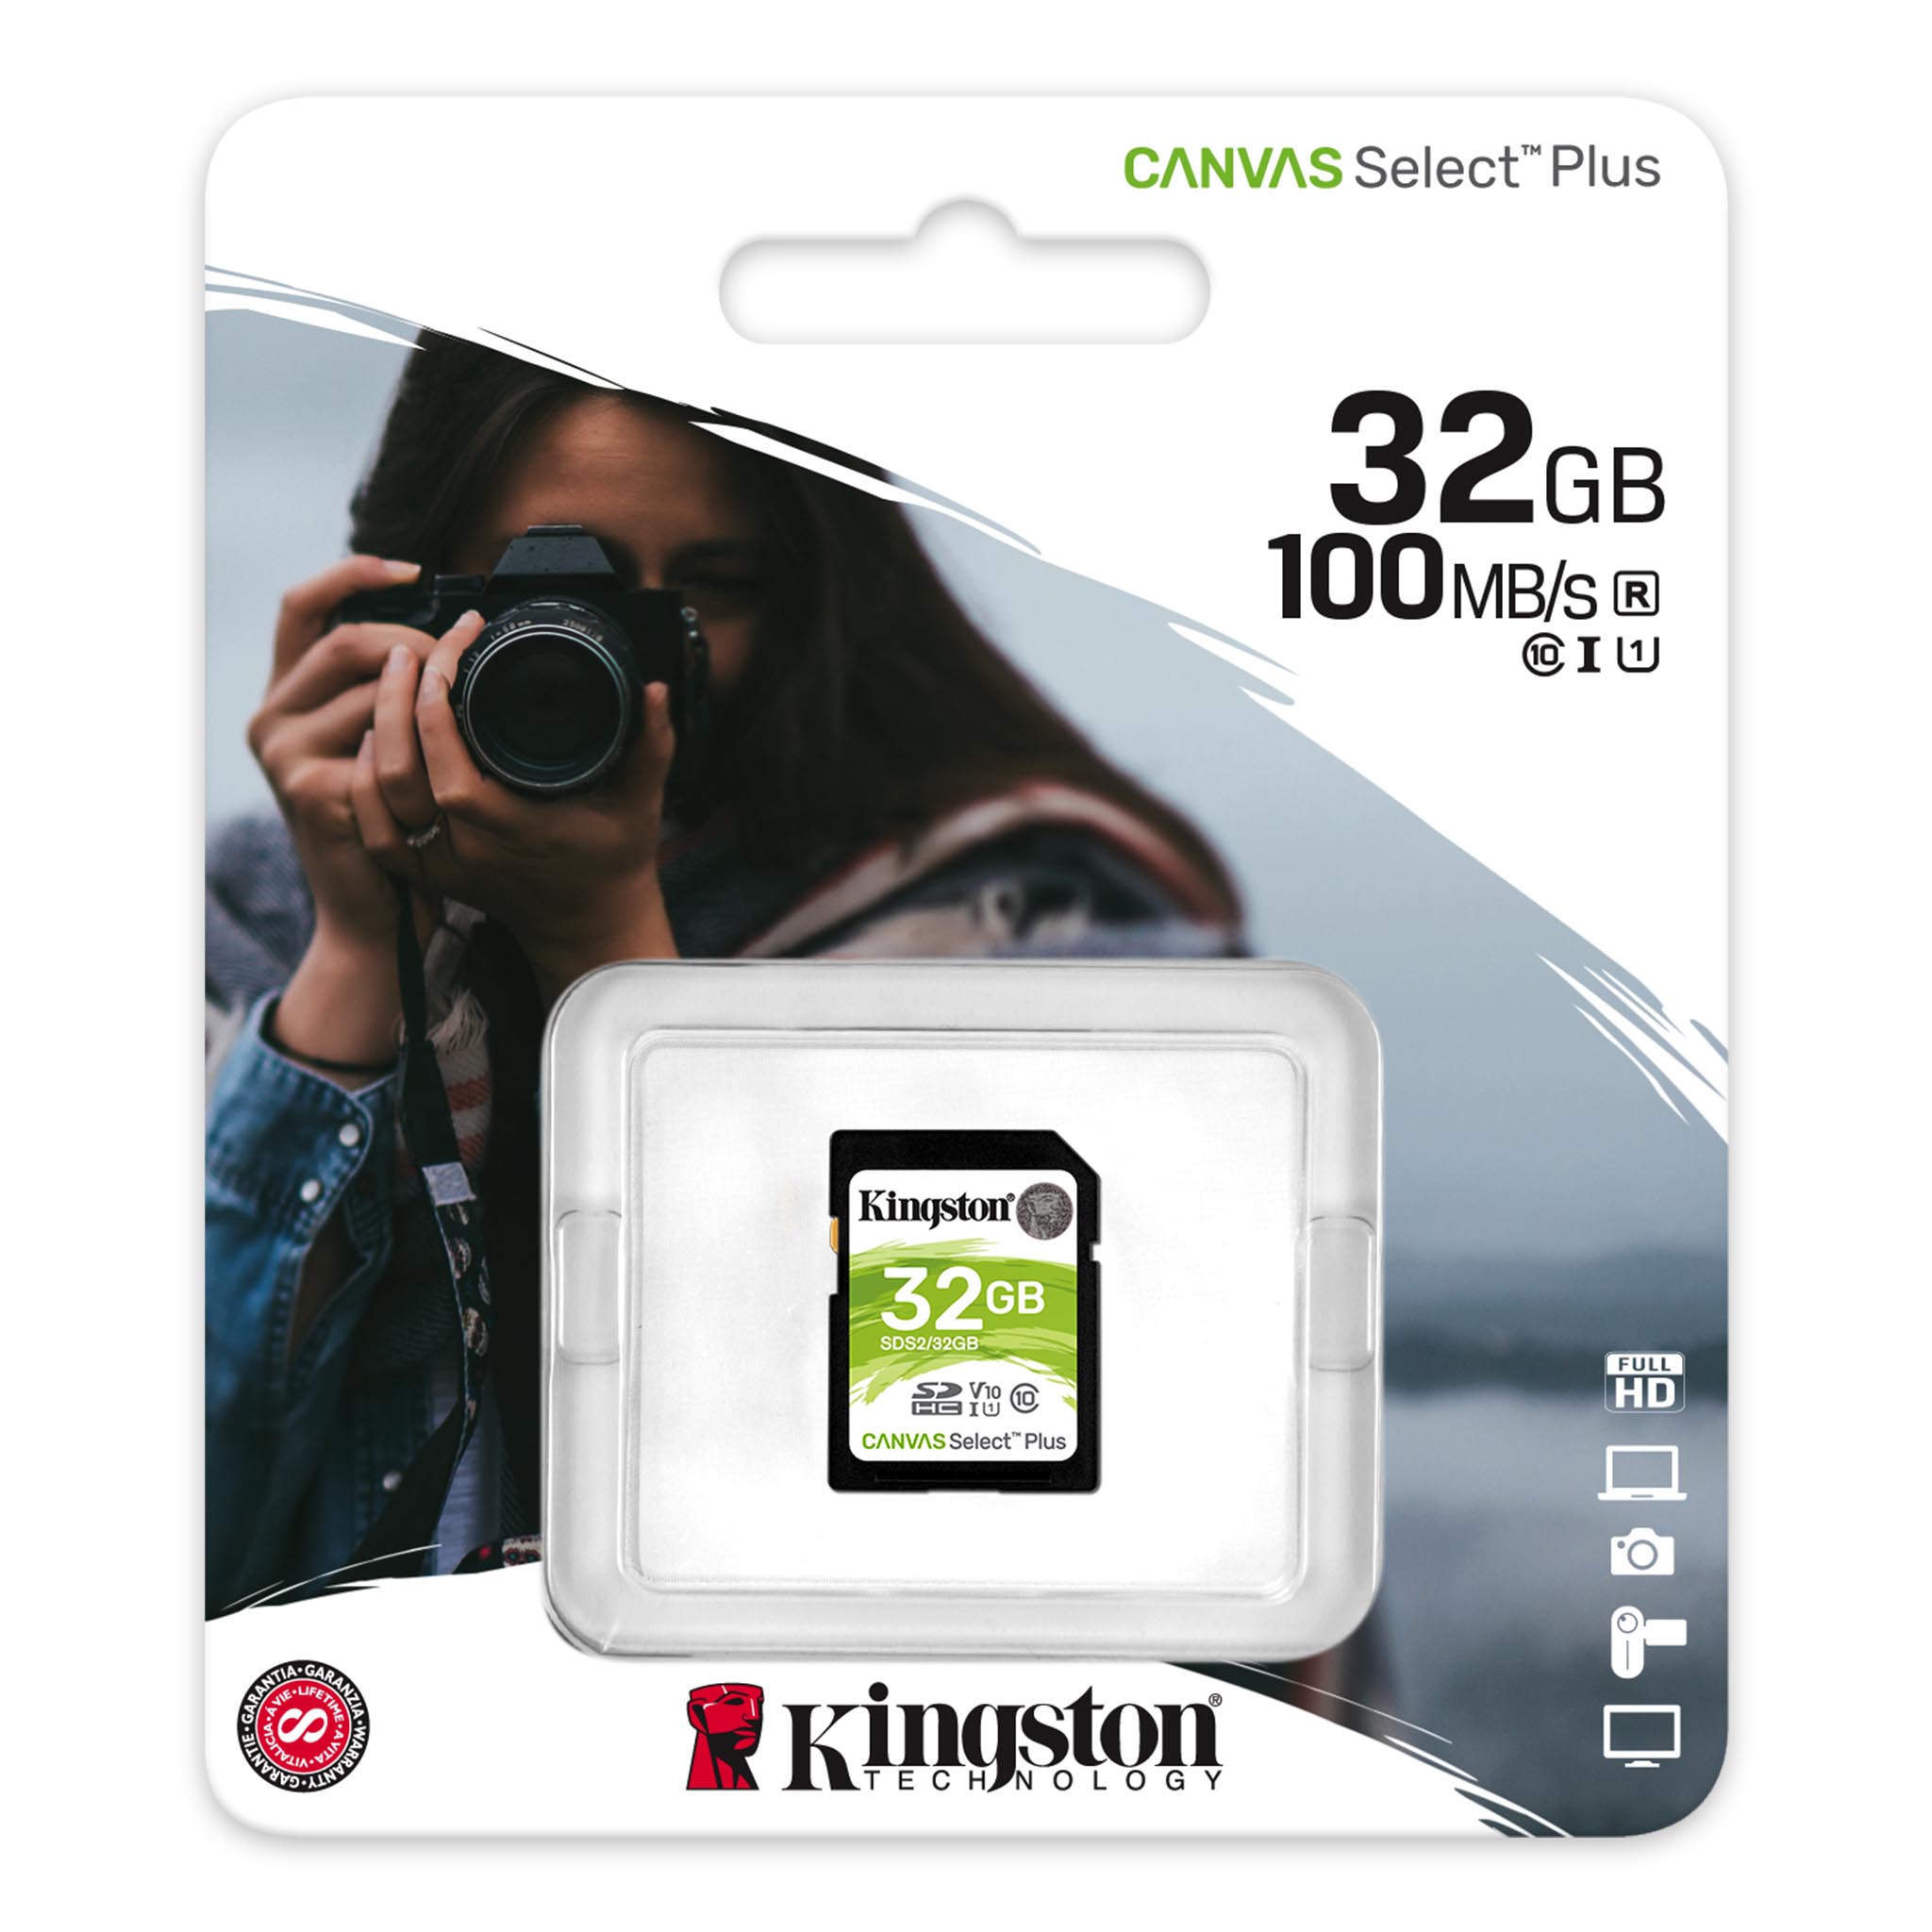 100MBs Works with Kingston Kingston 32GB ZTE V1050 MicroSDHC Canvas Select Plus Card Verified by SanFlash. 